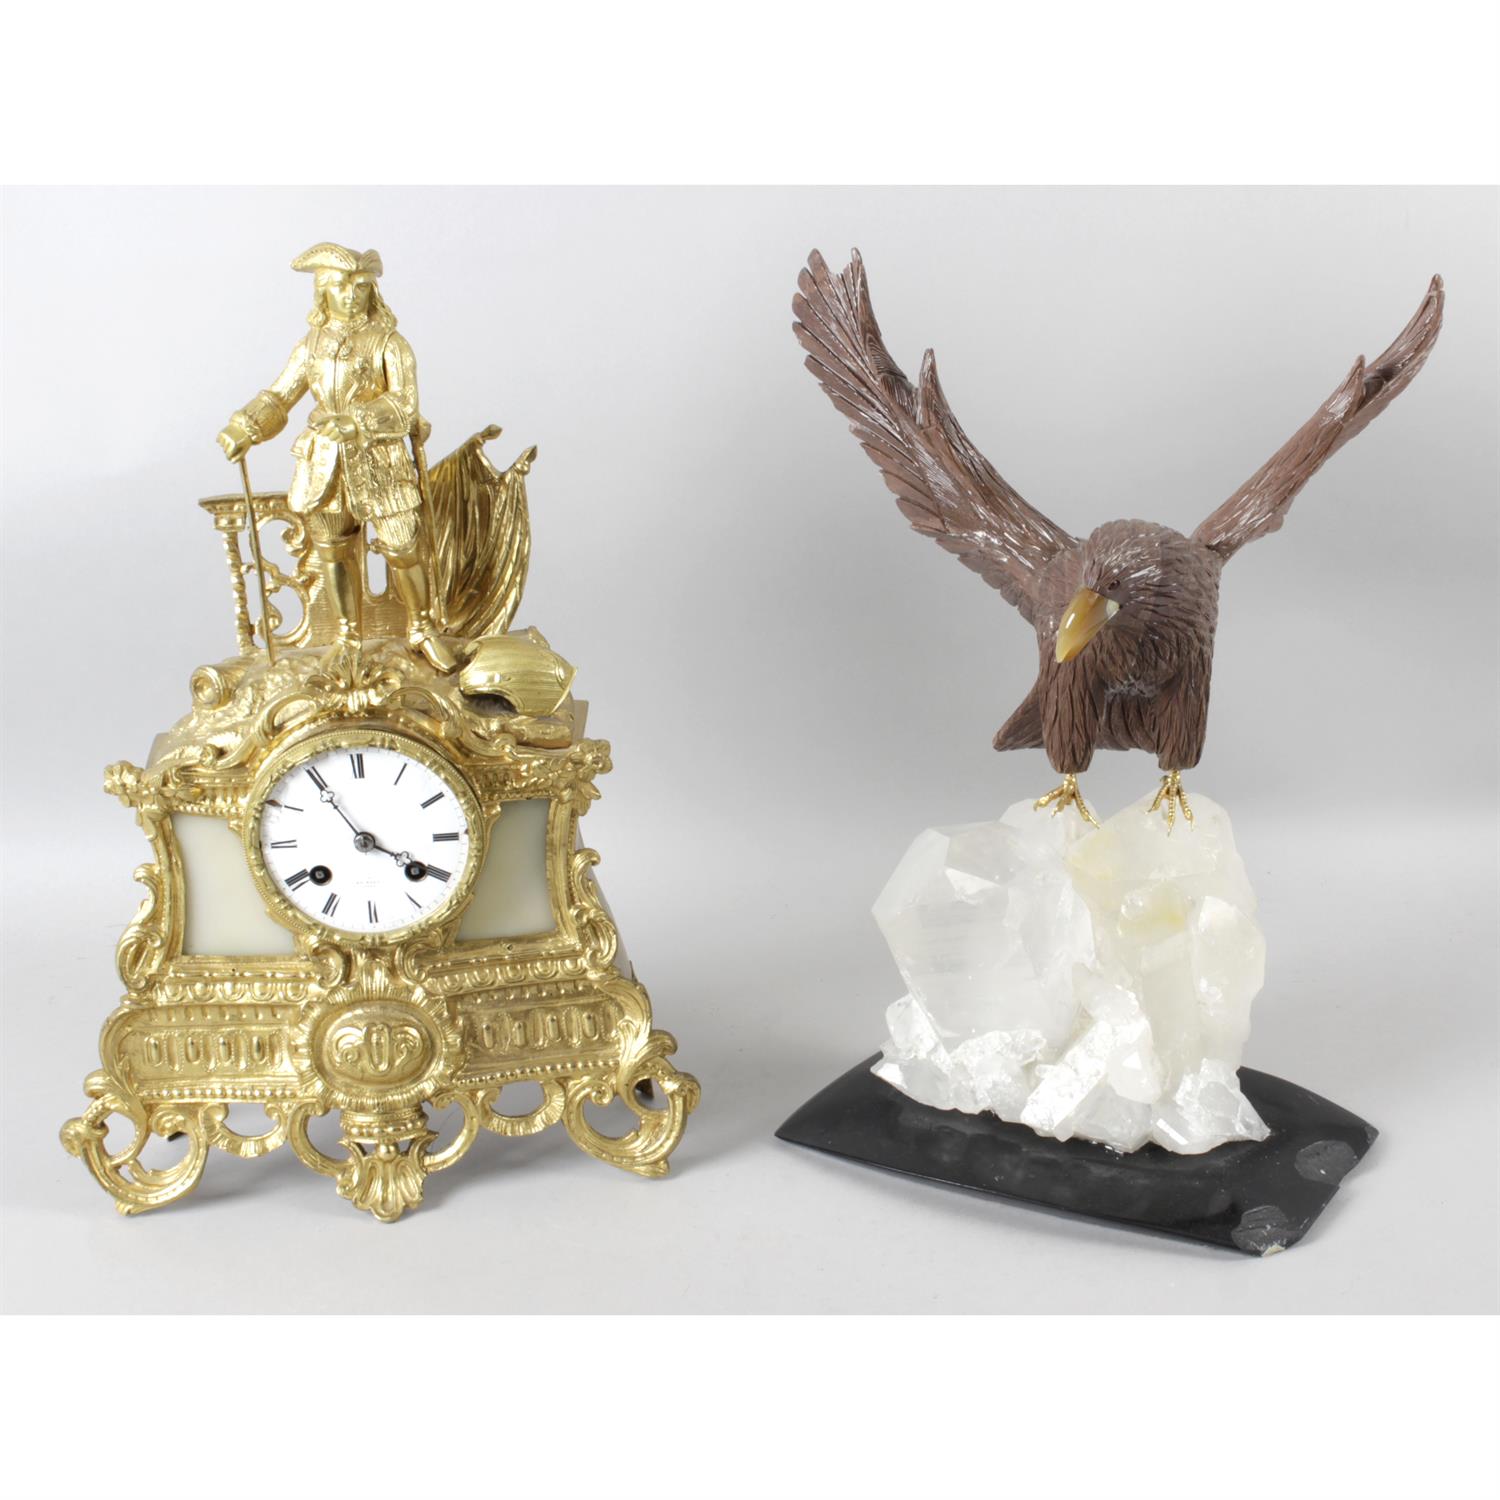 A 19th century gilt spelter cased mantel clock, together with a carved hardstone study of an eagle.